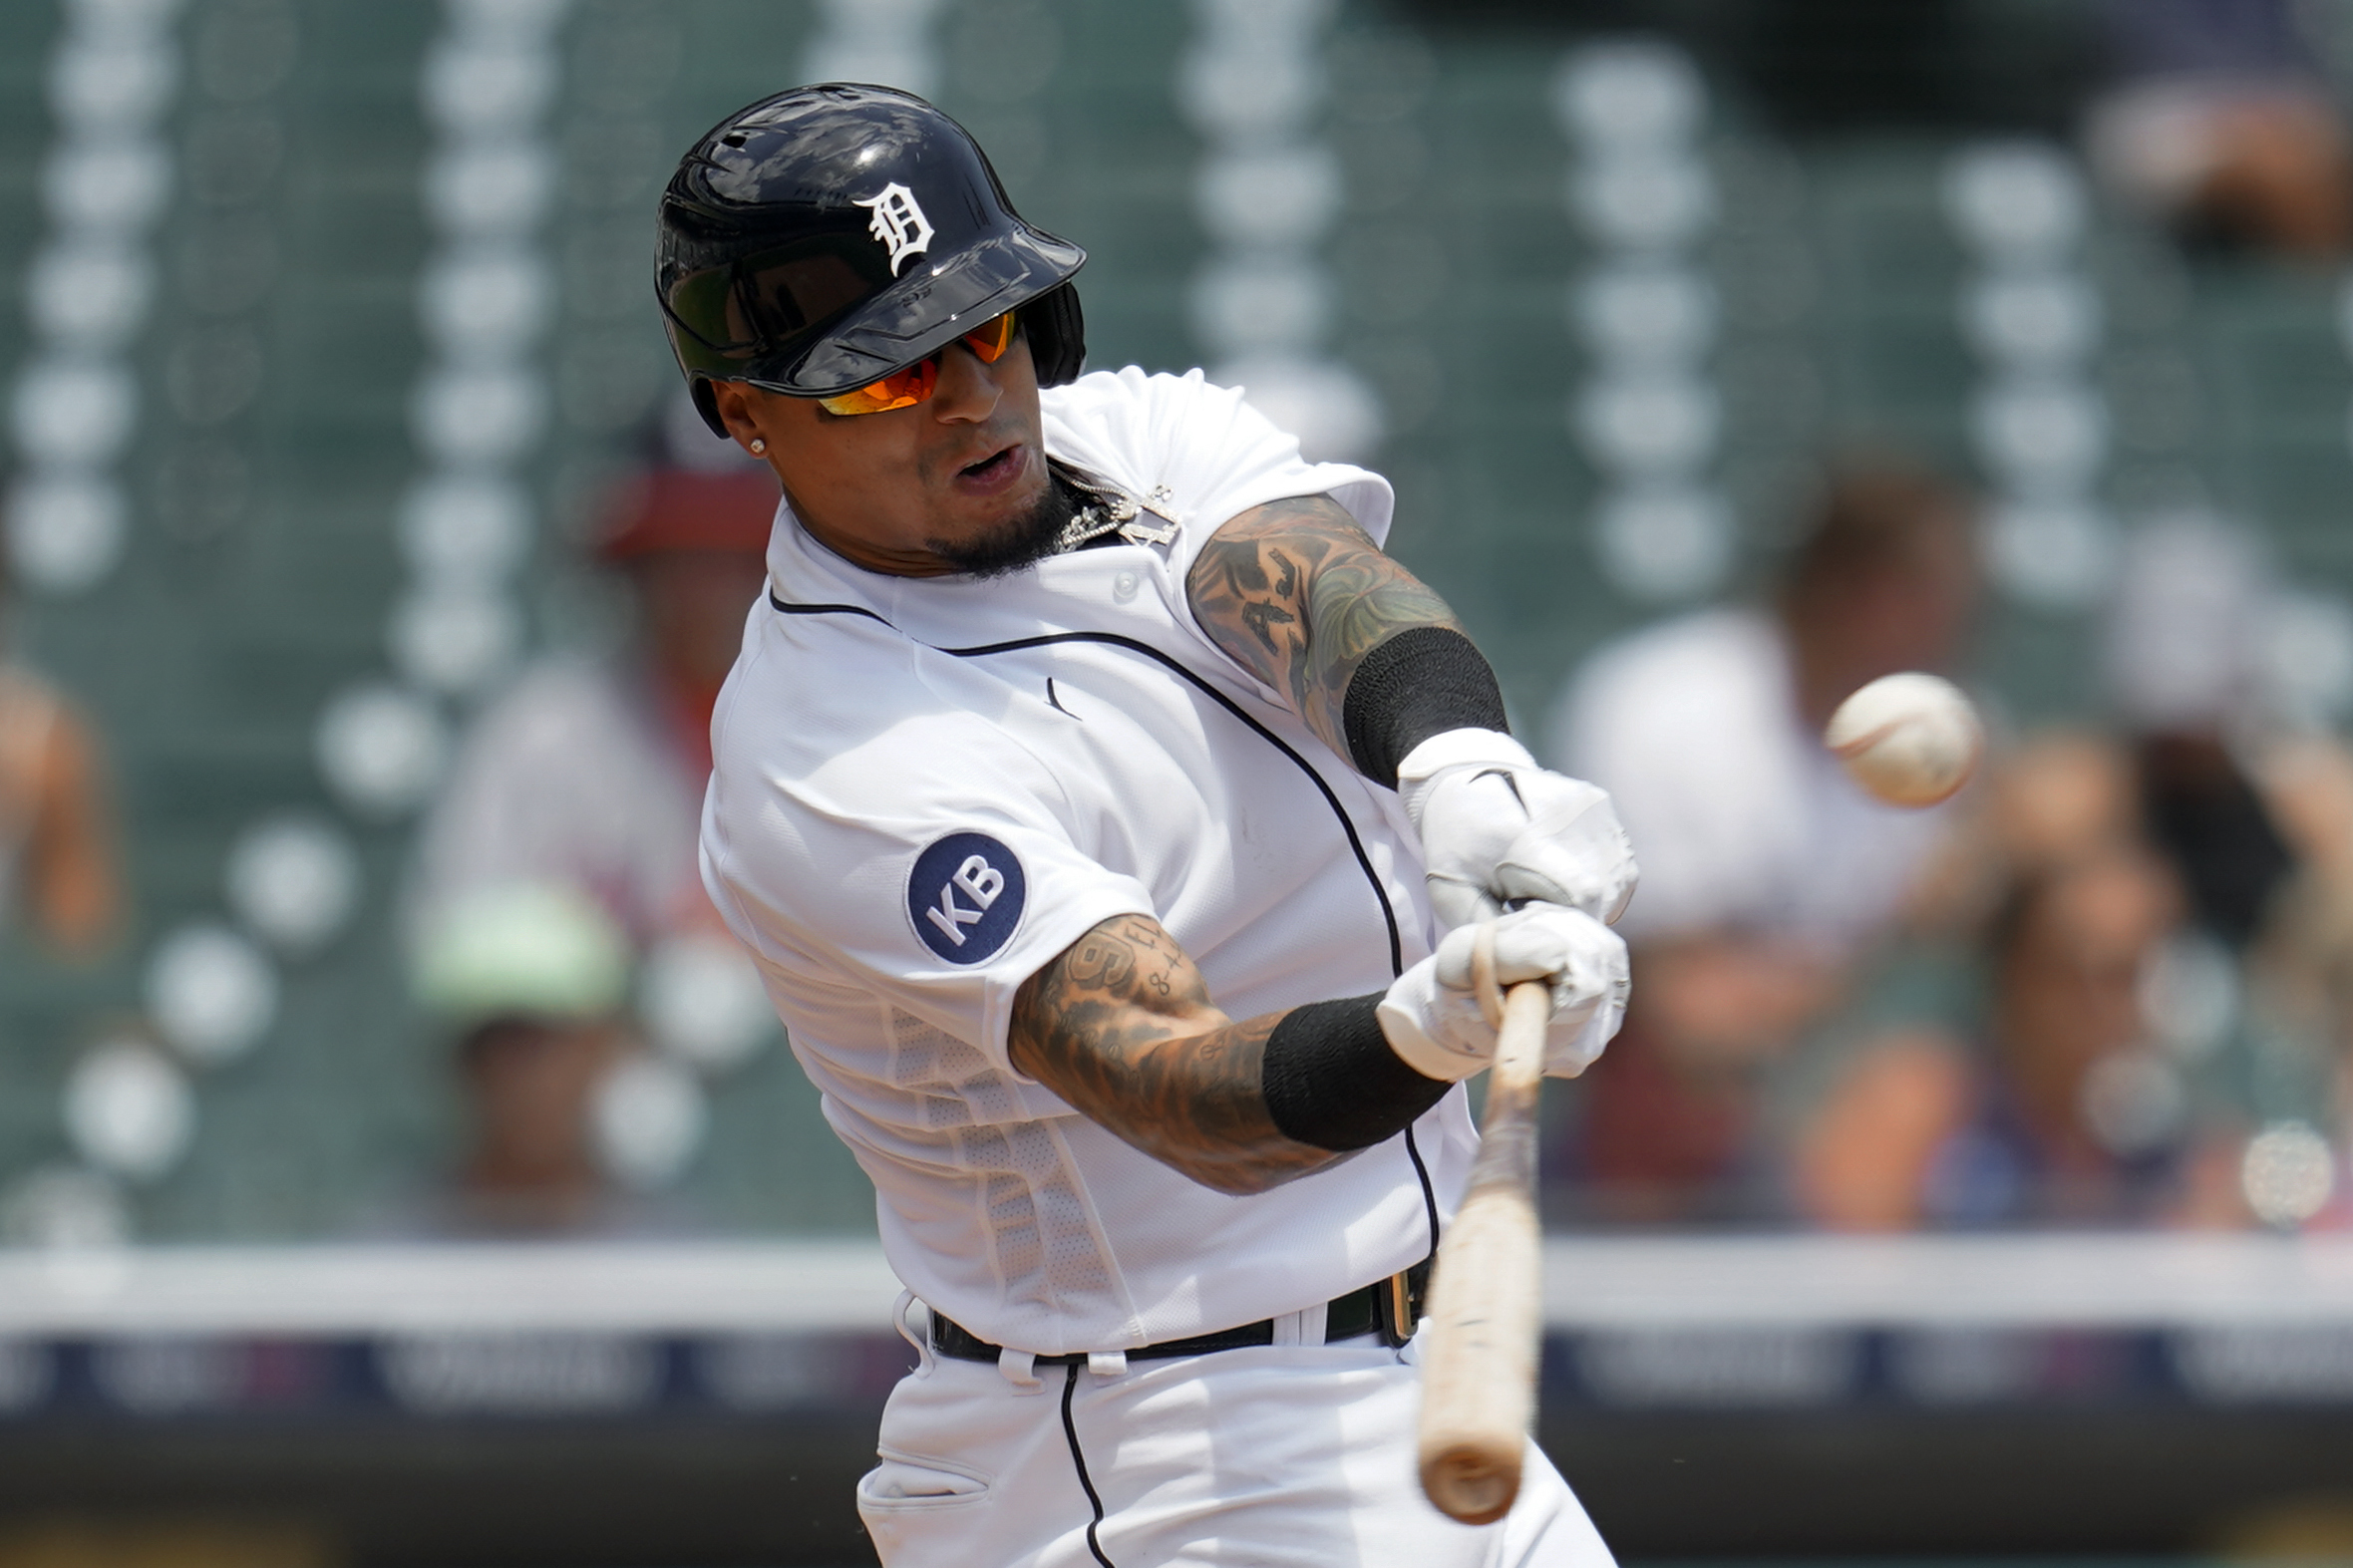 Local MLB player update: Javy Baez's struggles mount with Tigers